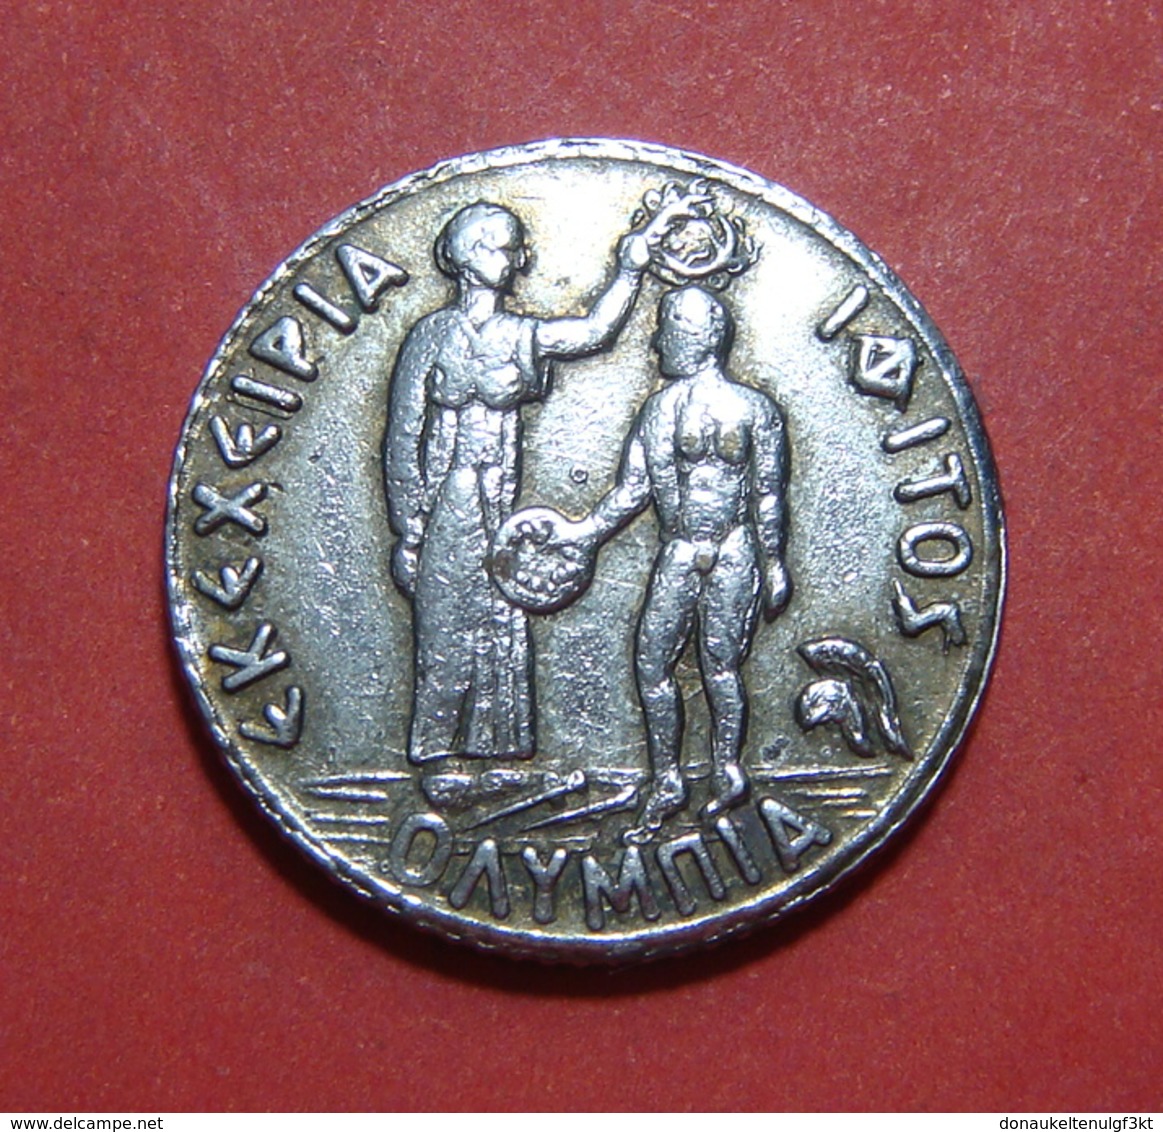 GREECE OLYMPIA TOKEN, 24 Mm. - Elongated Coins